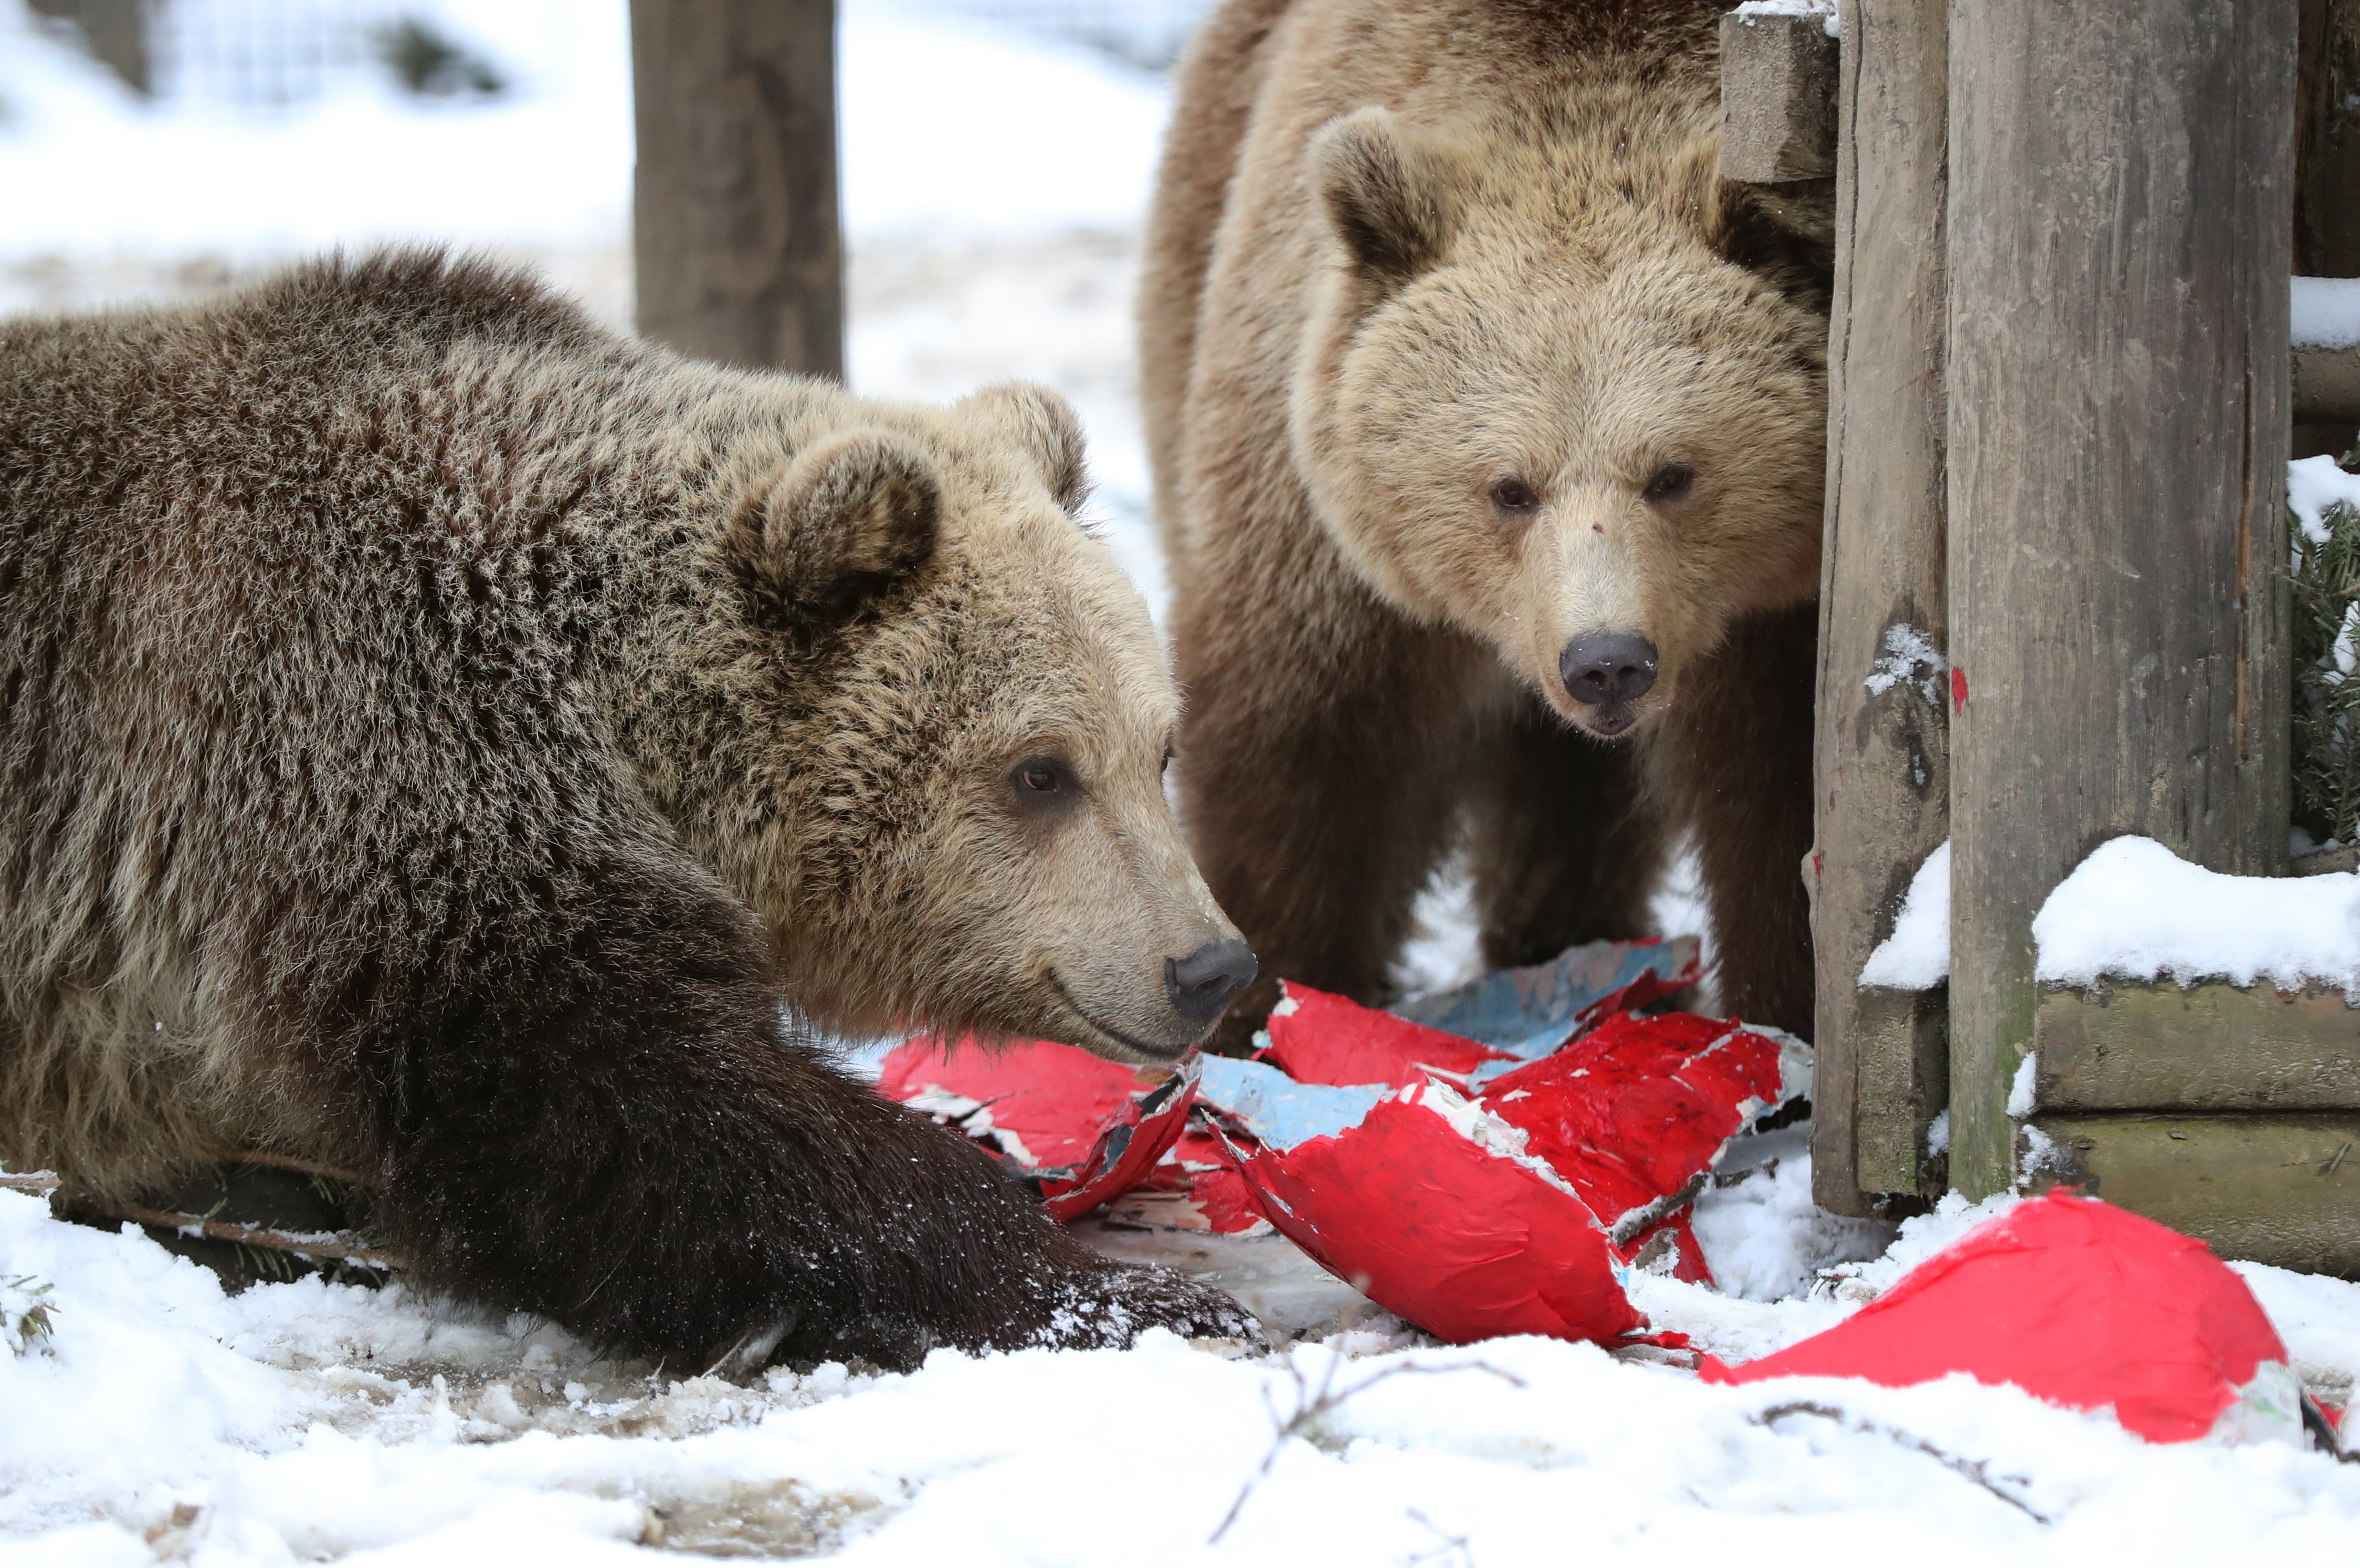 Rescued brown bear cubs Mish (left) and Lucy investigate a heart-shaped pinata stuffed with their favourite treats as part of a Valentine’s Day enrichment programme at the Wildwood Trust in Herne Bay, Kent (Gareth Fuller/PA)